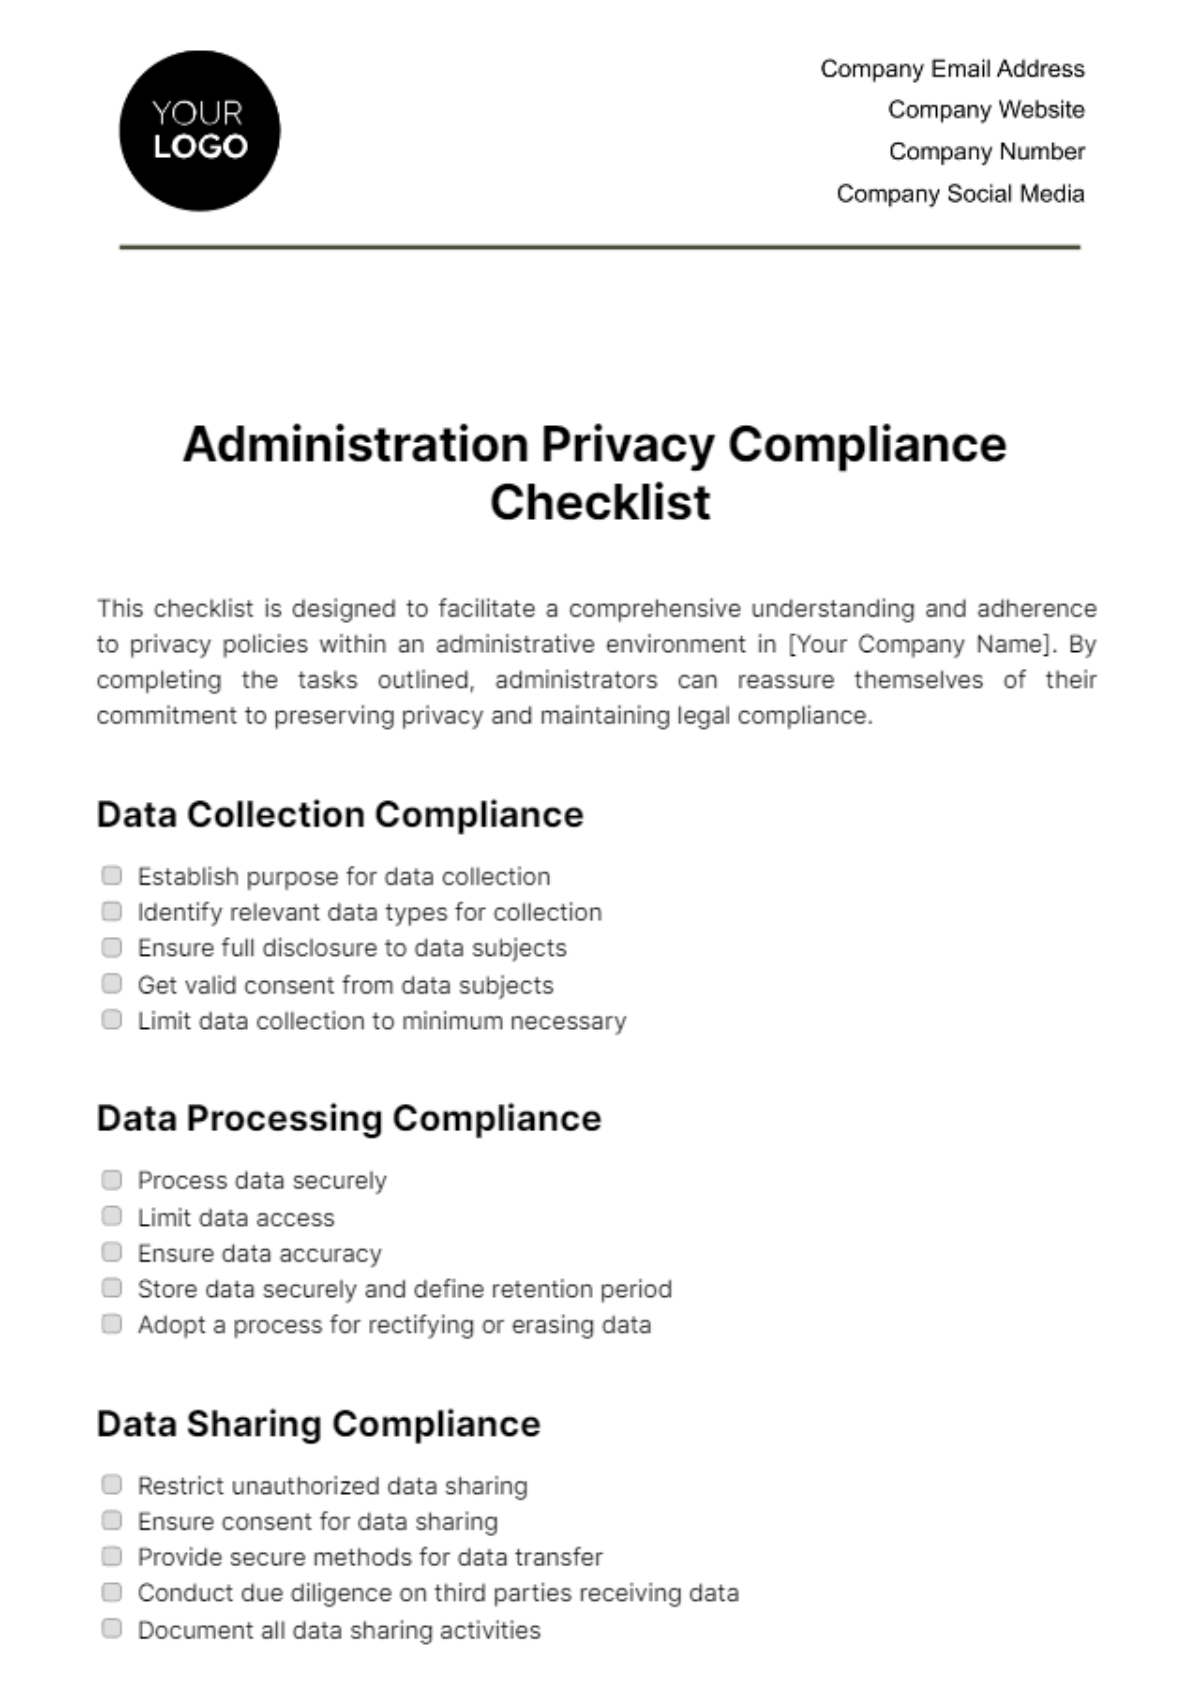 Free Administration Privacy Compliance Checklist Template